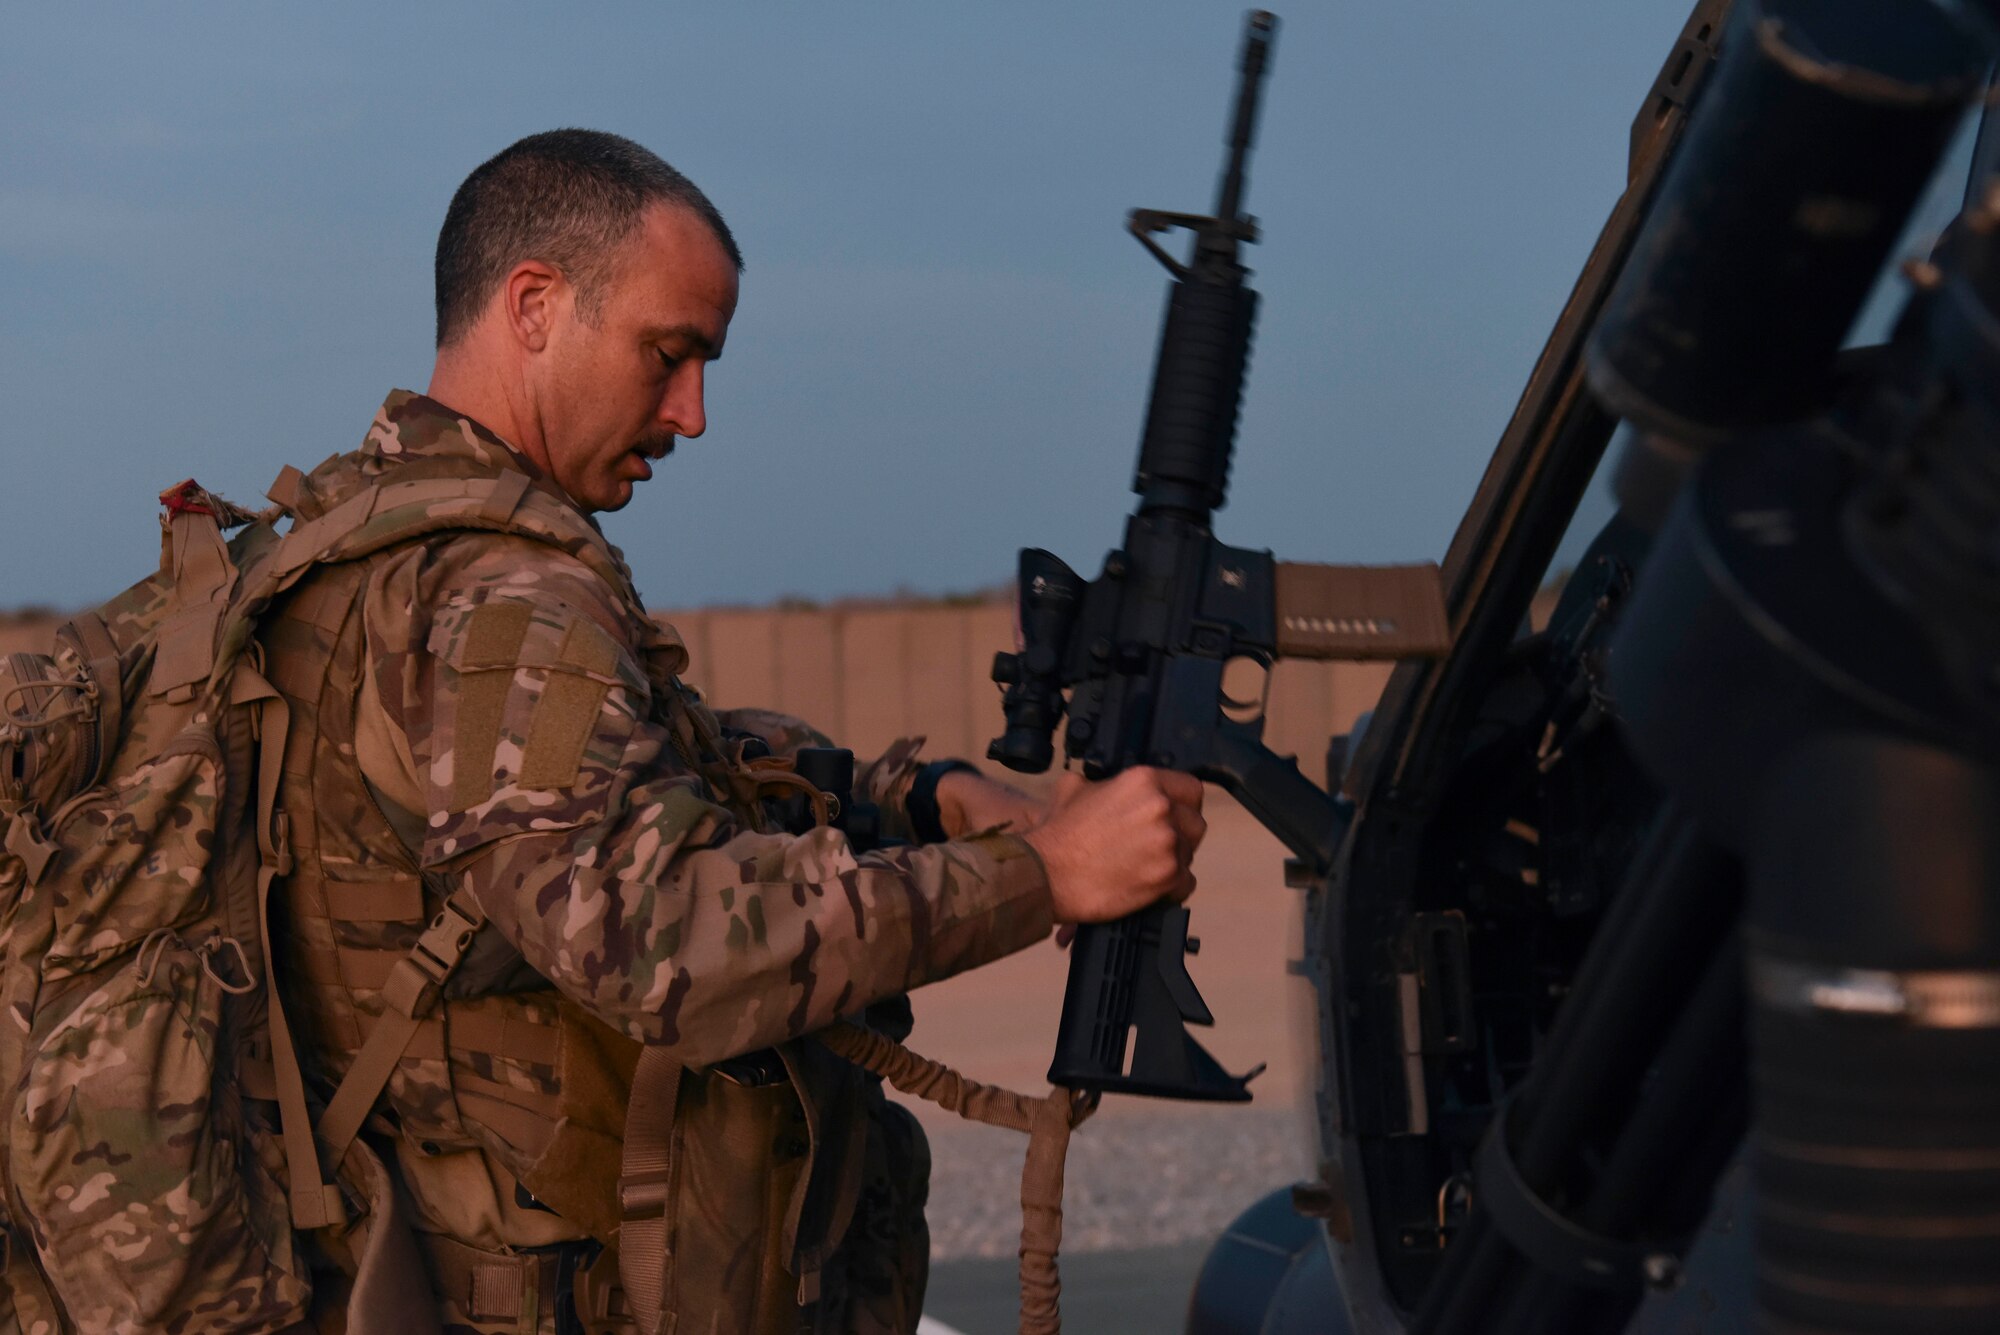 A U.S. Air Force service member assigned to the 303rd Expeditionary Rescue Squadron loads his gear prior to an exercise at Camp Simba, Kenya, March 24, 2021.